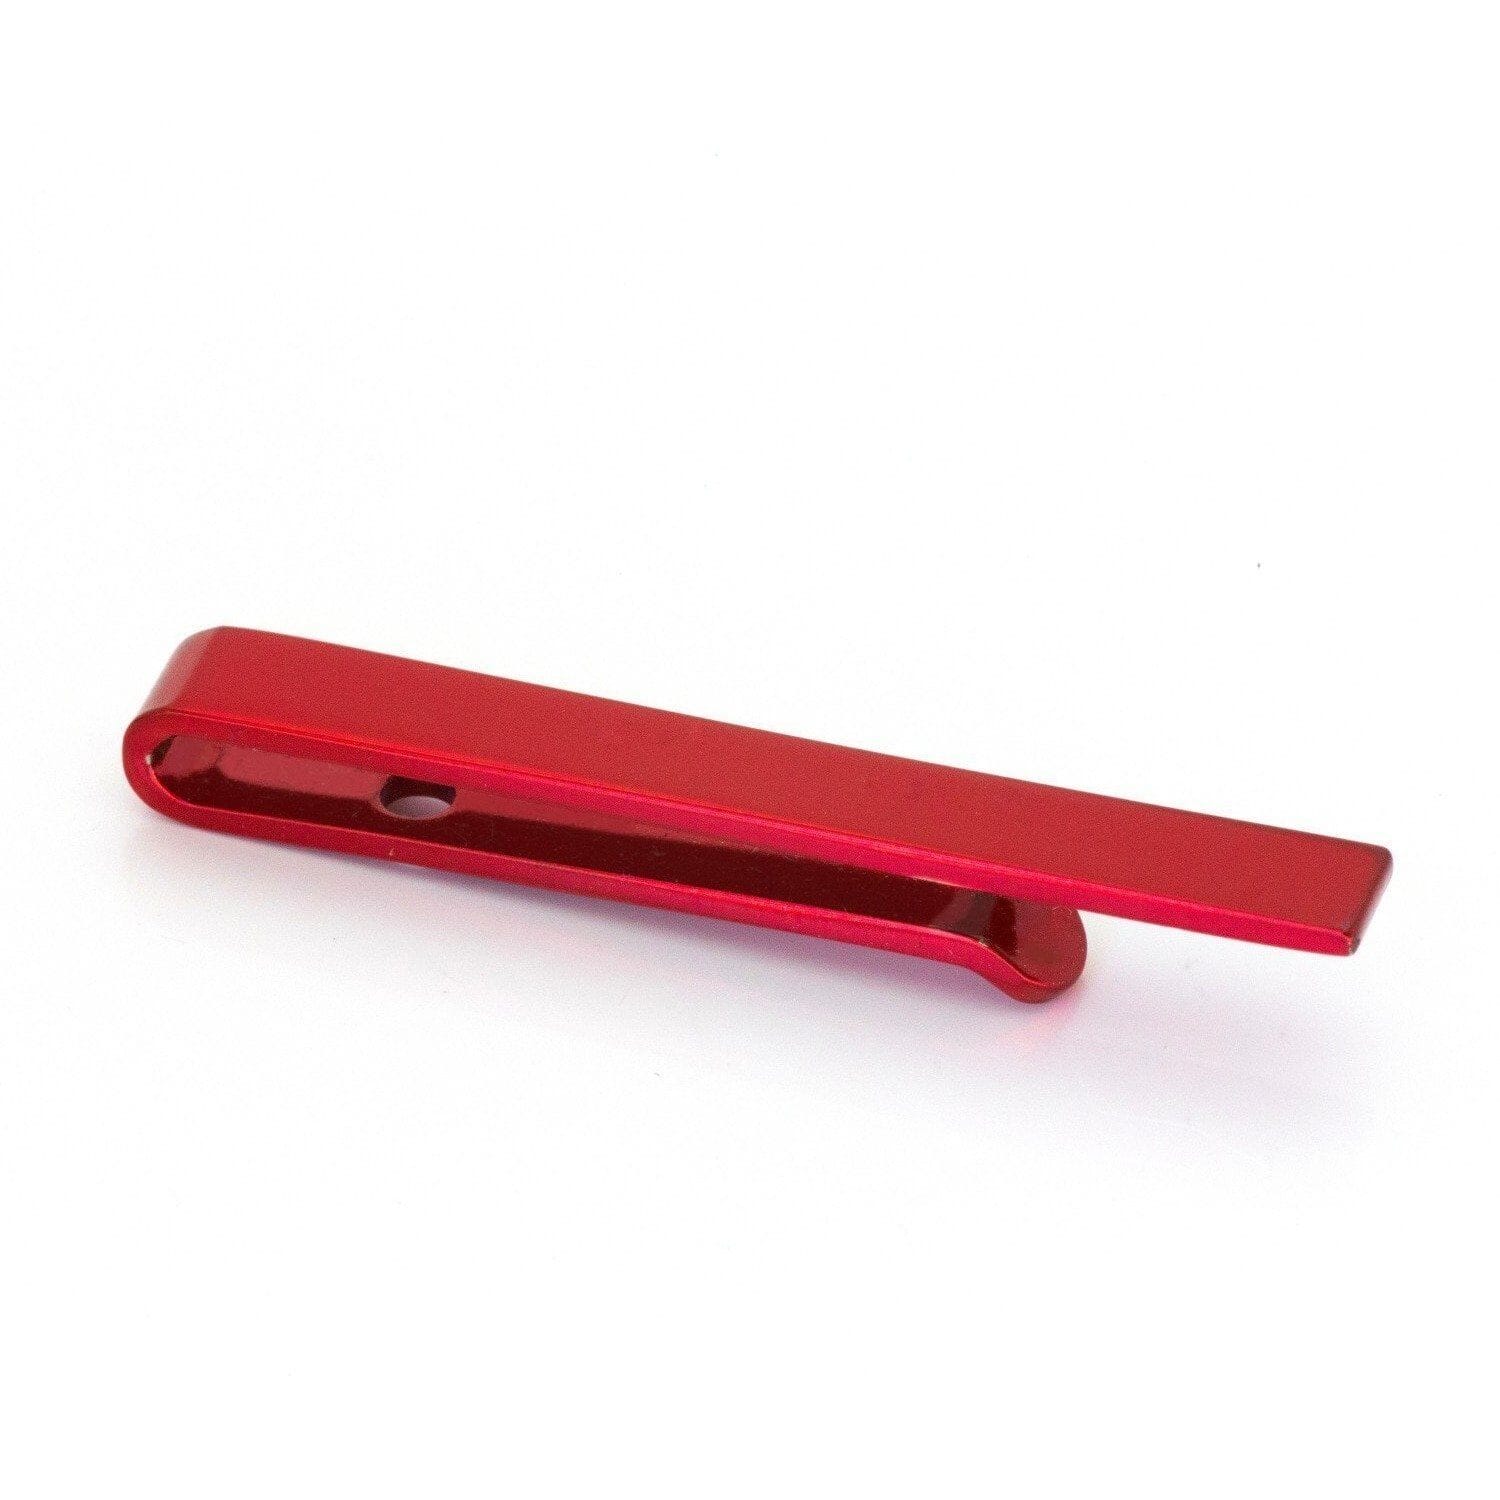 Red Metallic Small Tie Bar Tie Bars Clinks Red Metallic Small Tie Bar 